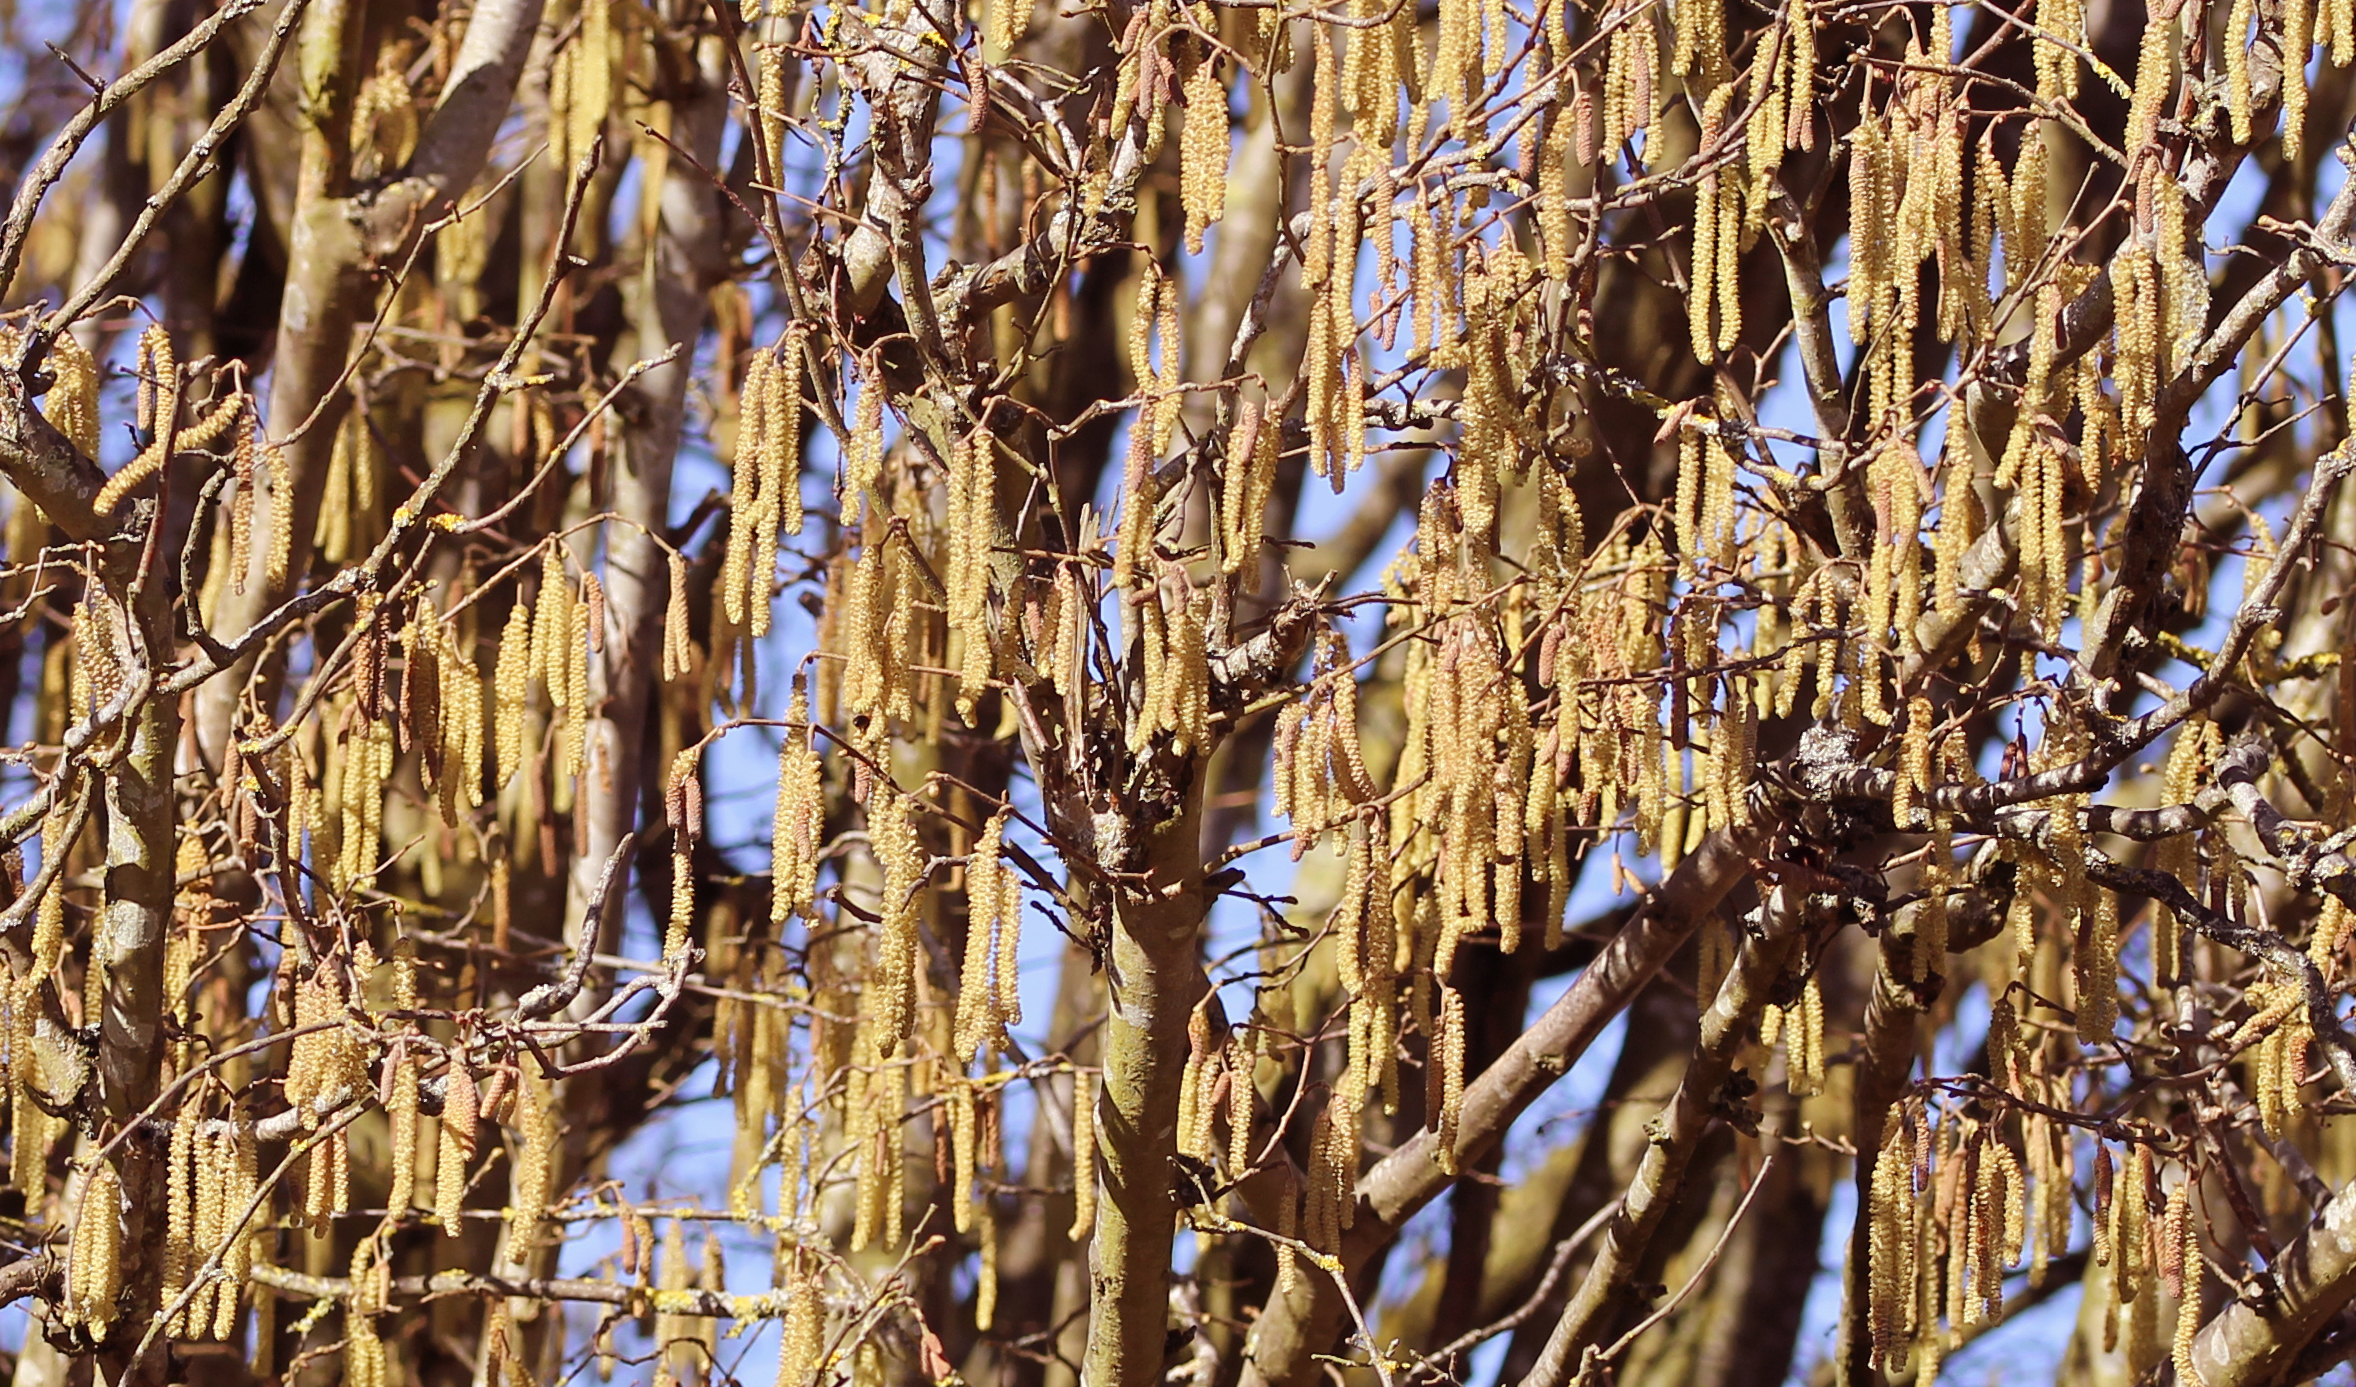 Catkins in mass